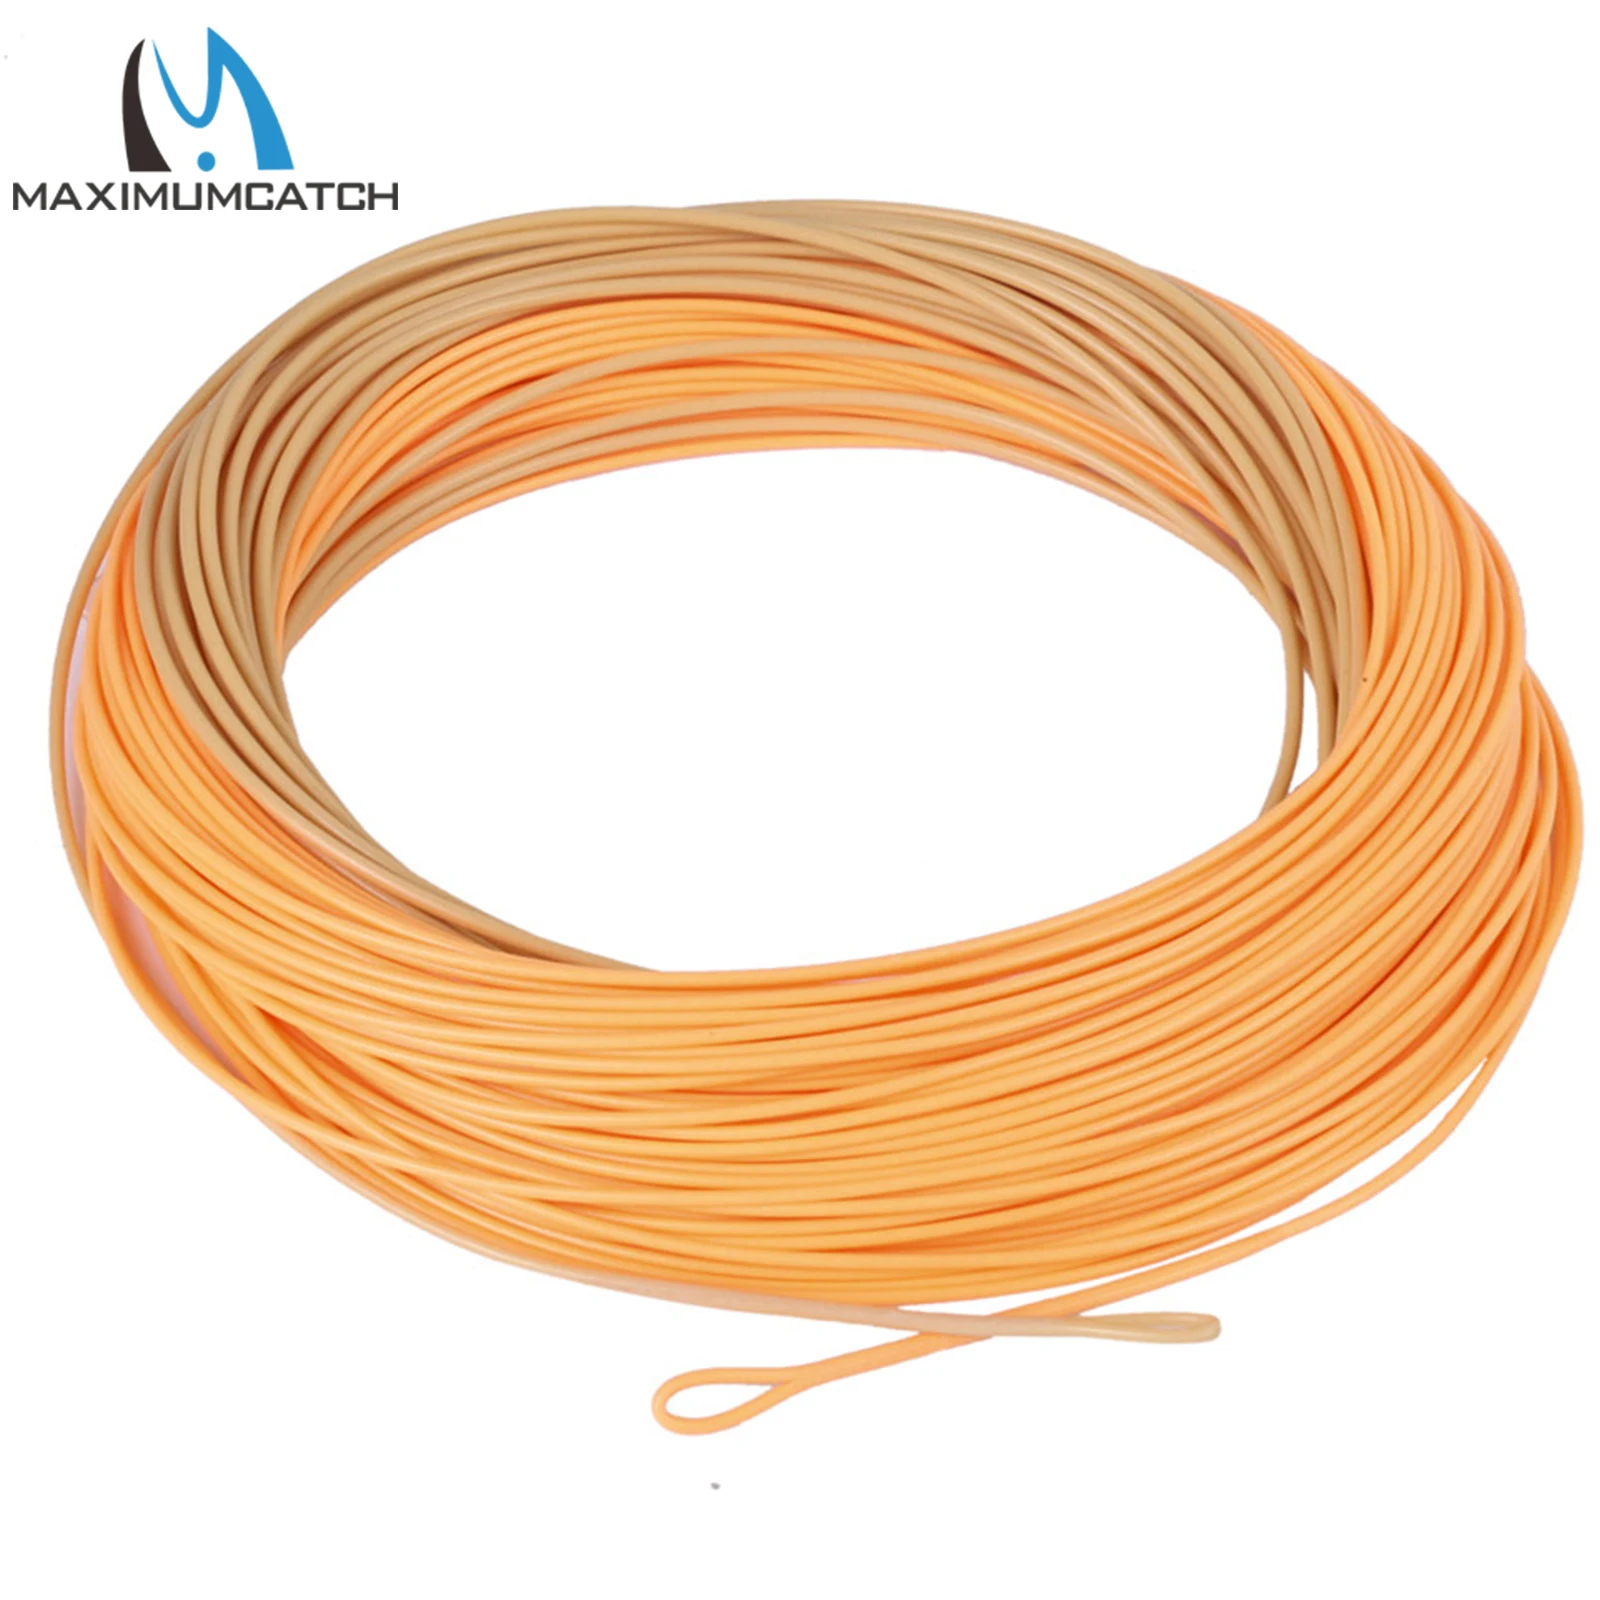 Maximumcatch Nymph ConnectCore Shooting Running Line Fly Fishing Line  Two/Triple Color 100FT 20LB Level 0.55mm Tenkara Line